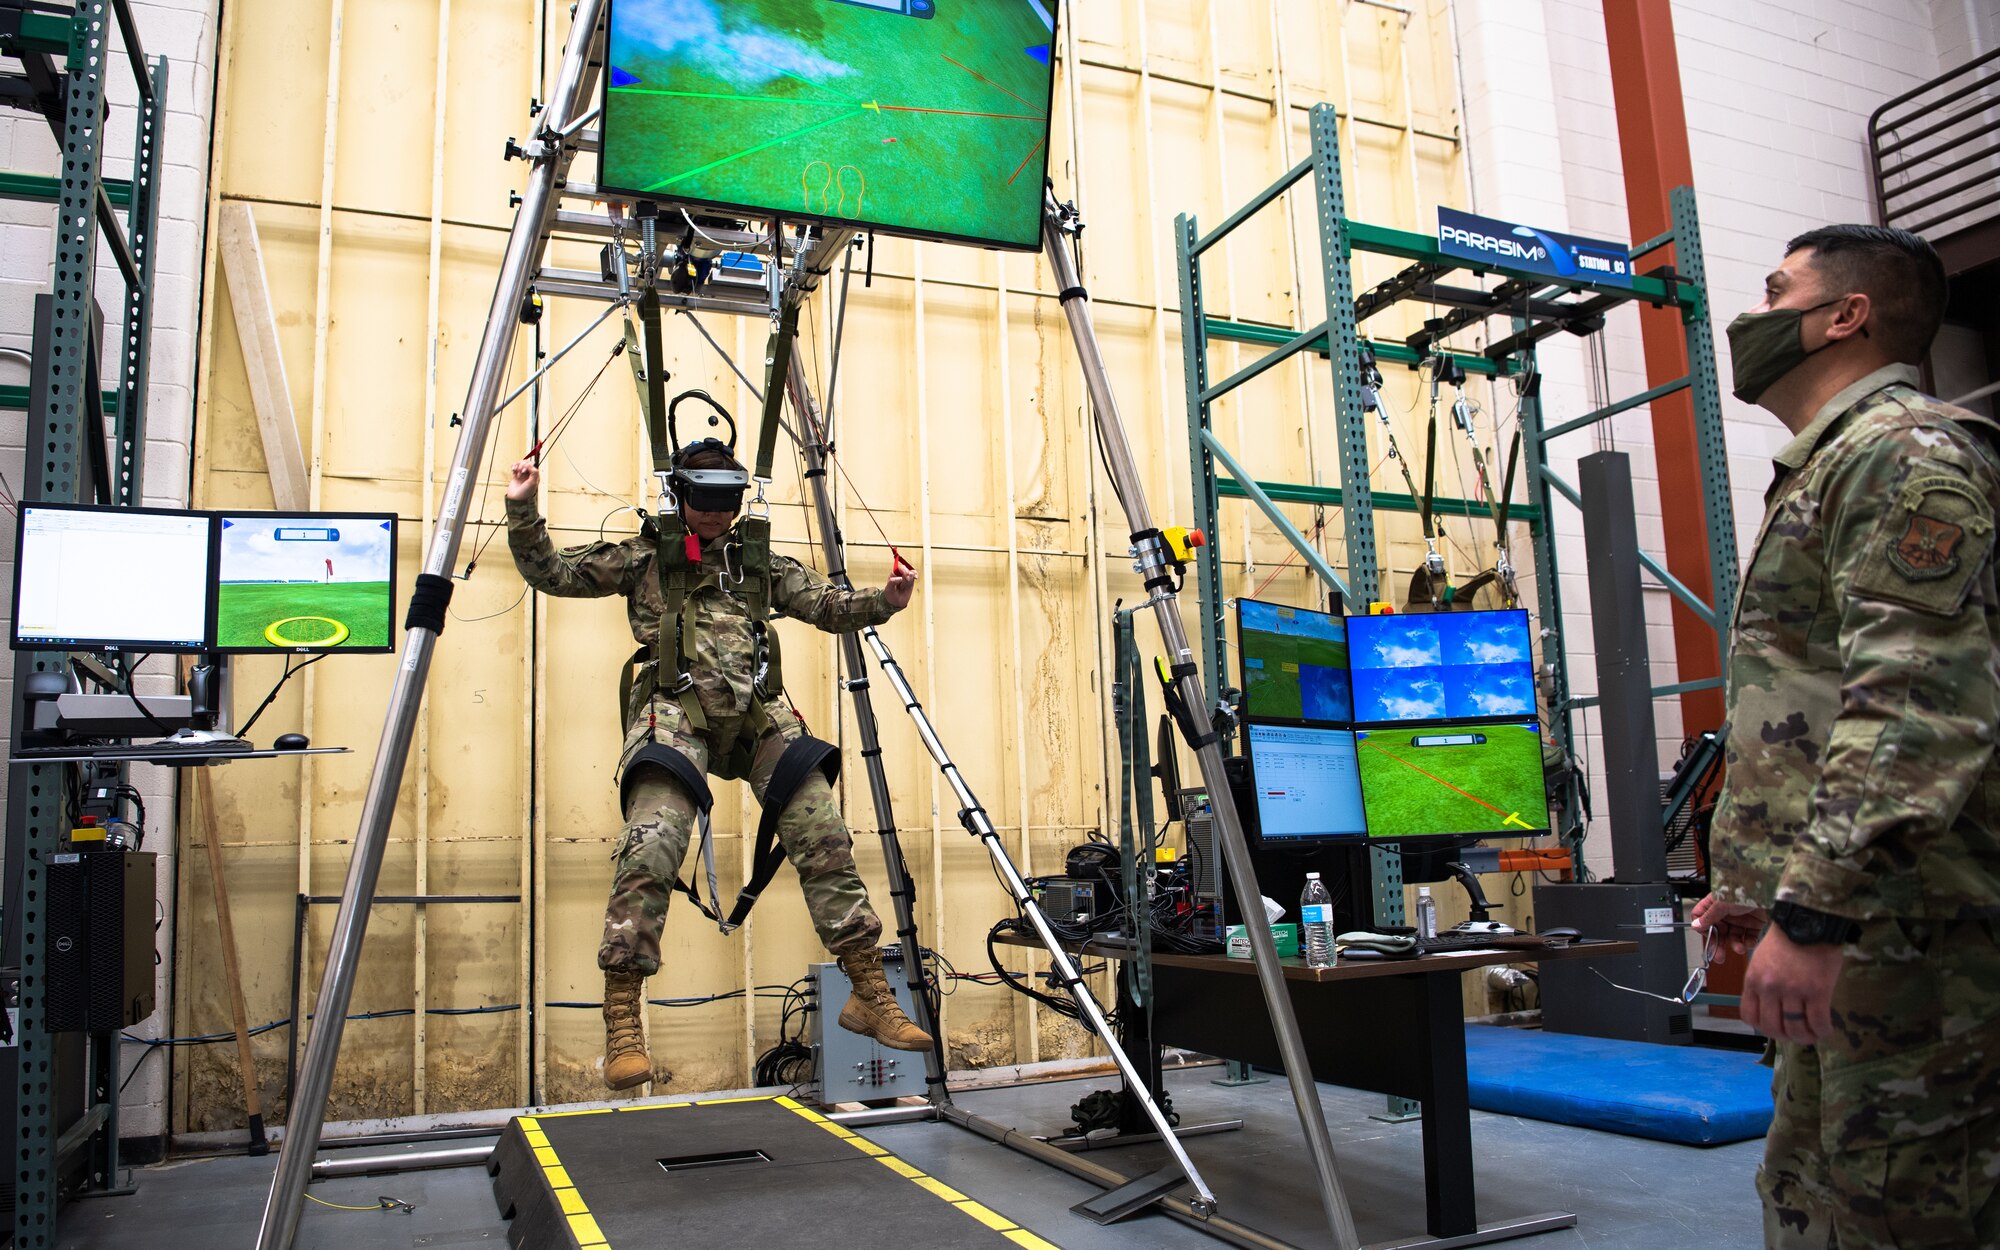 Chief Master Sgt. of the Air Force JoAnne S. Bass uses the 2nd Operational Support Squadron’s parachute simulator